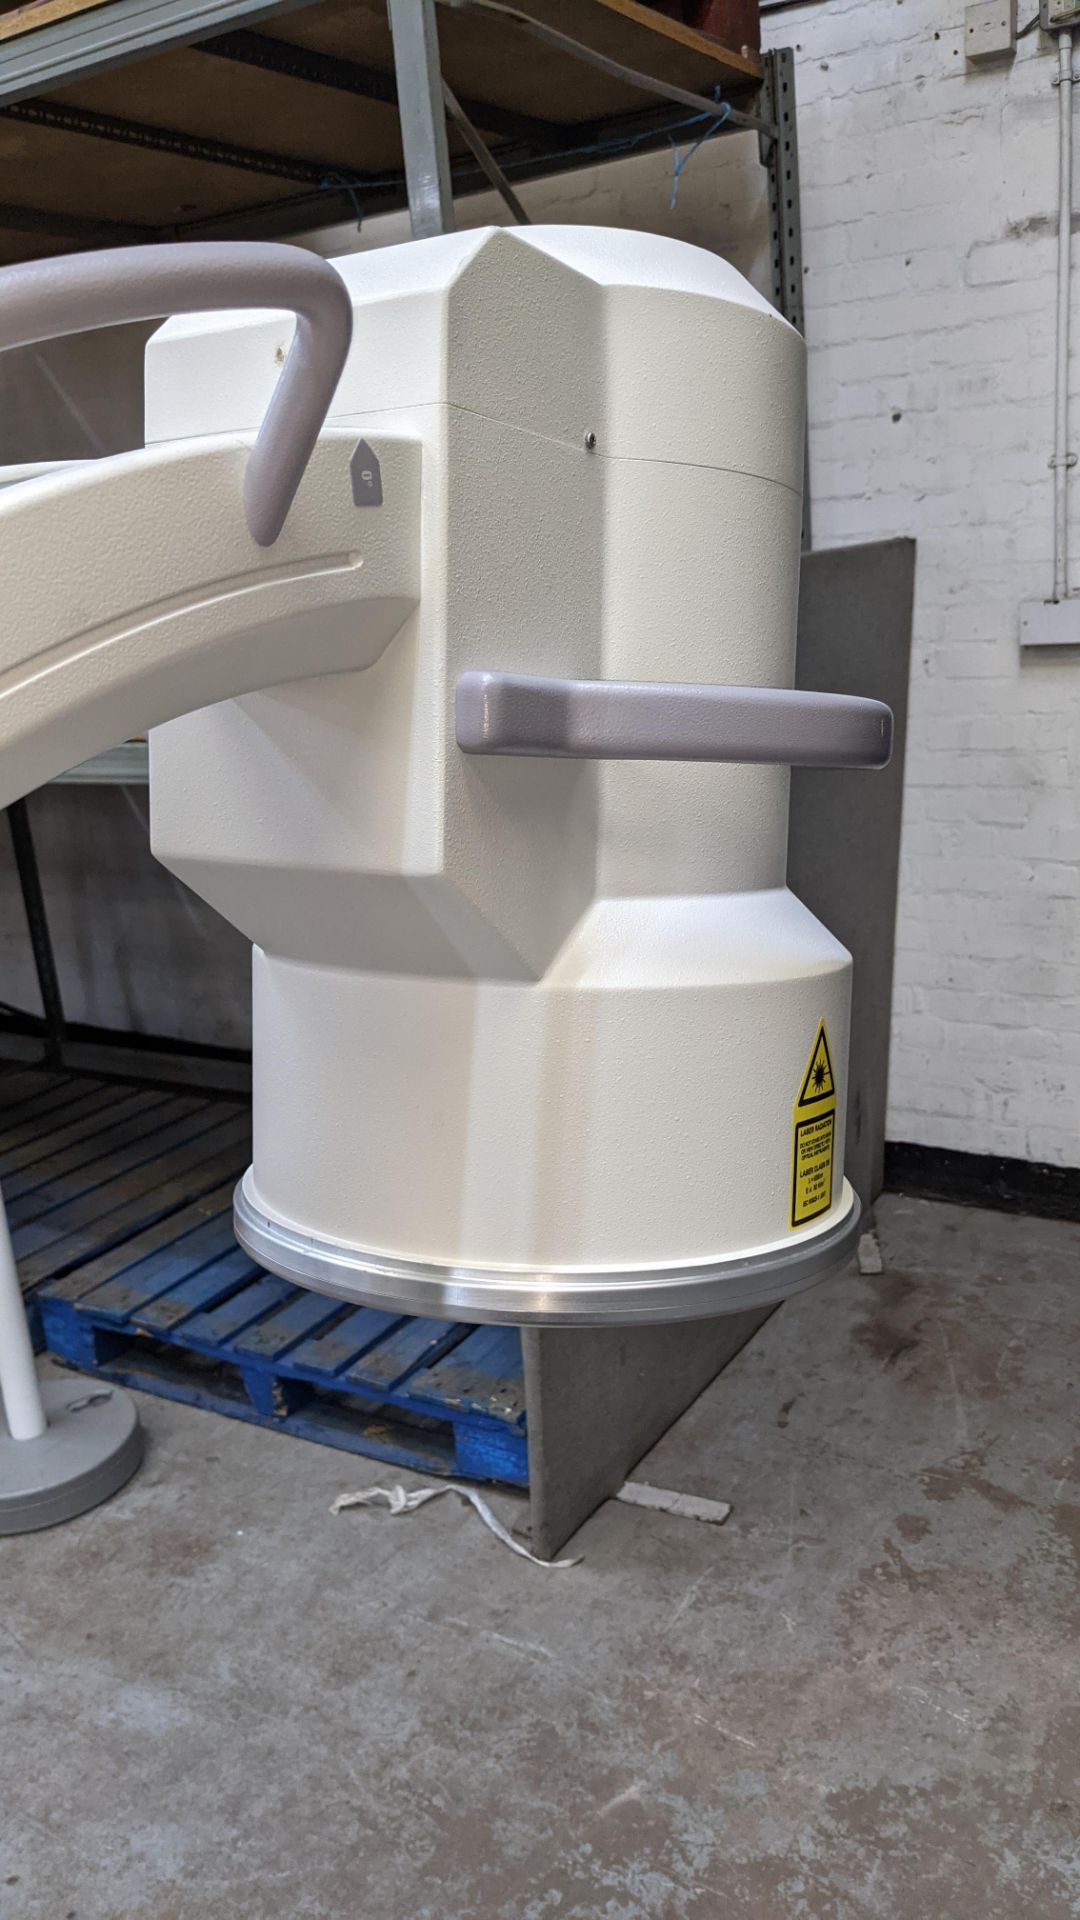 GE-OEC Fluorostar imaging system, purchased new in August 2017. EO4 Series. - Image 31 of 68